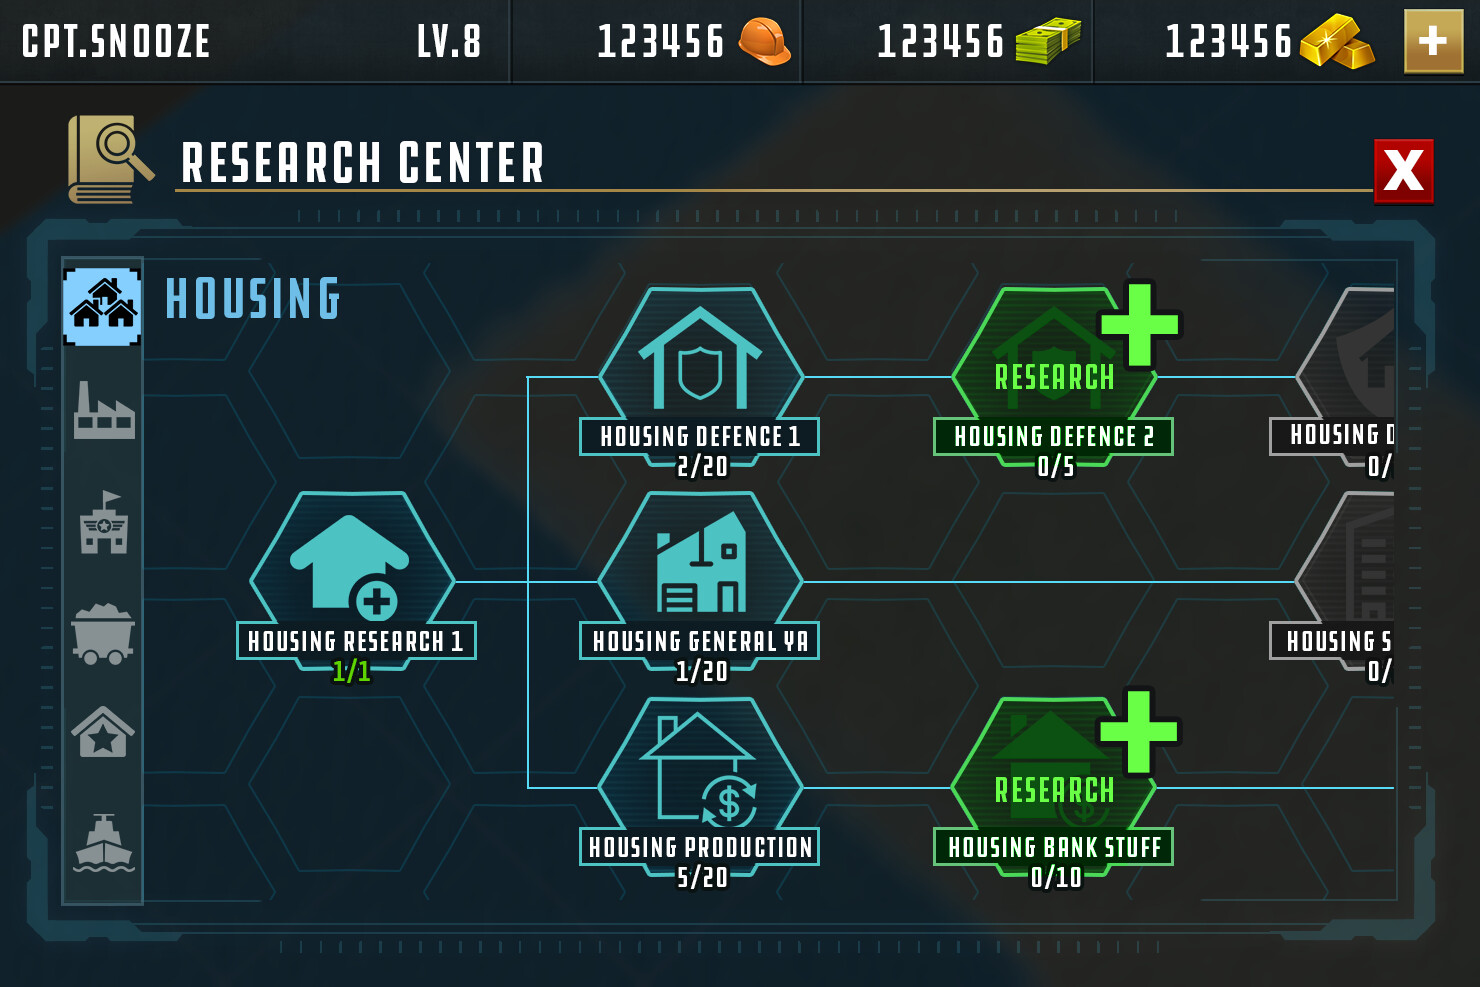 Research center UI concept. Player level determined unlockable skills among other things.